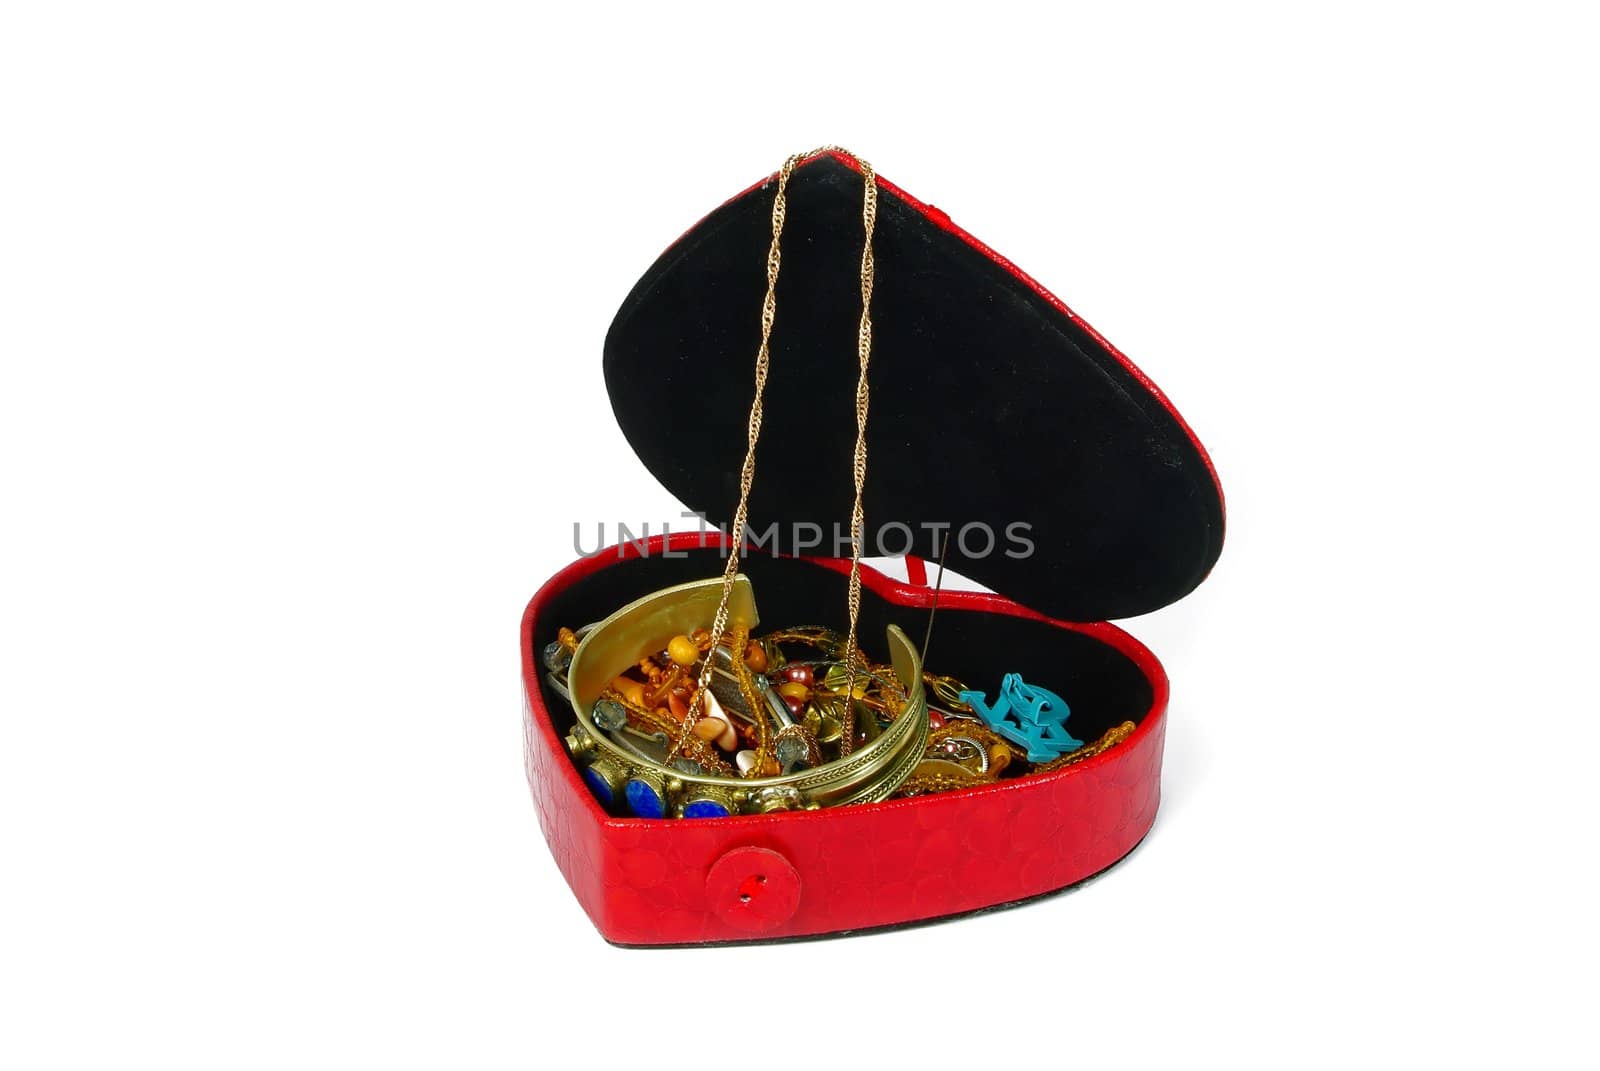 Jewelry in gift box on white background by Vitamin